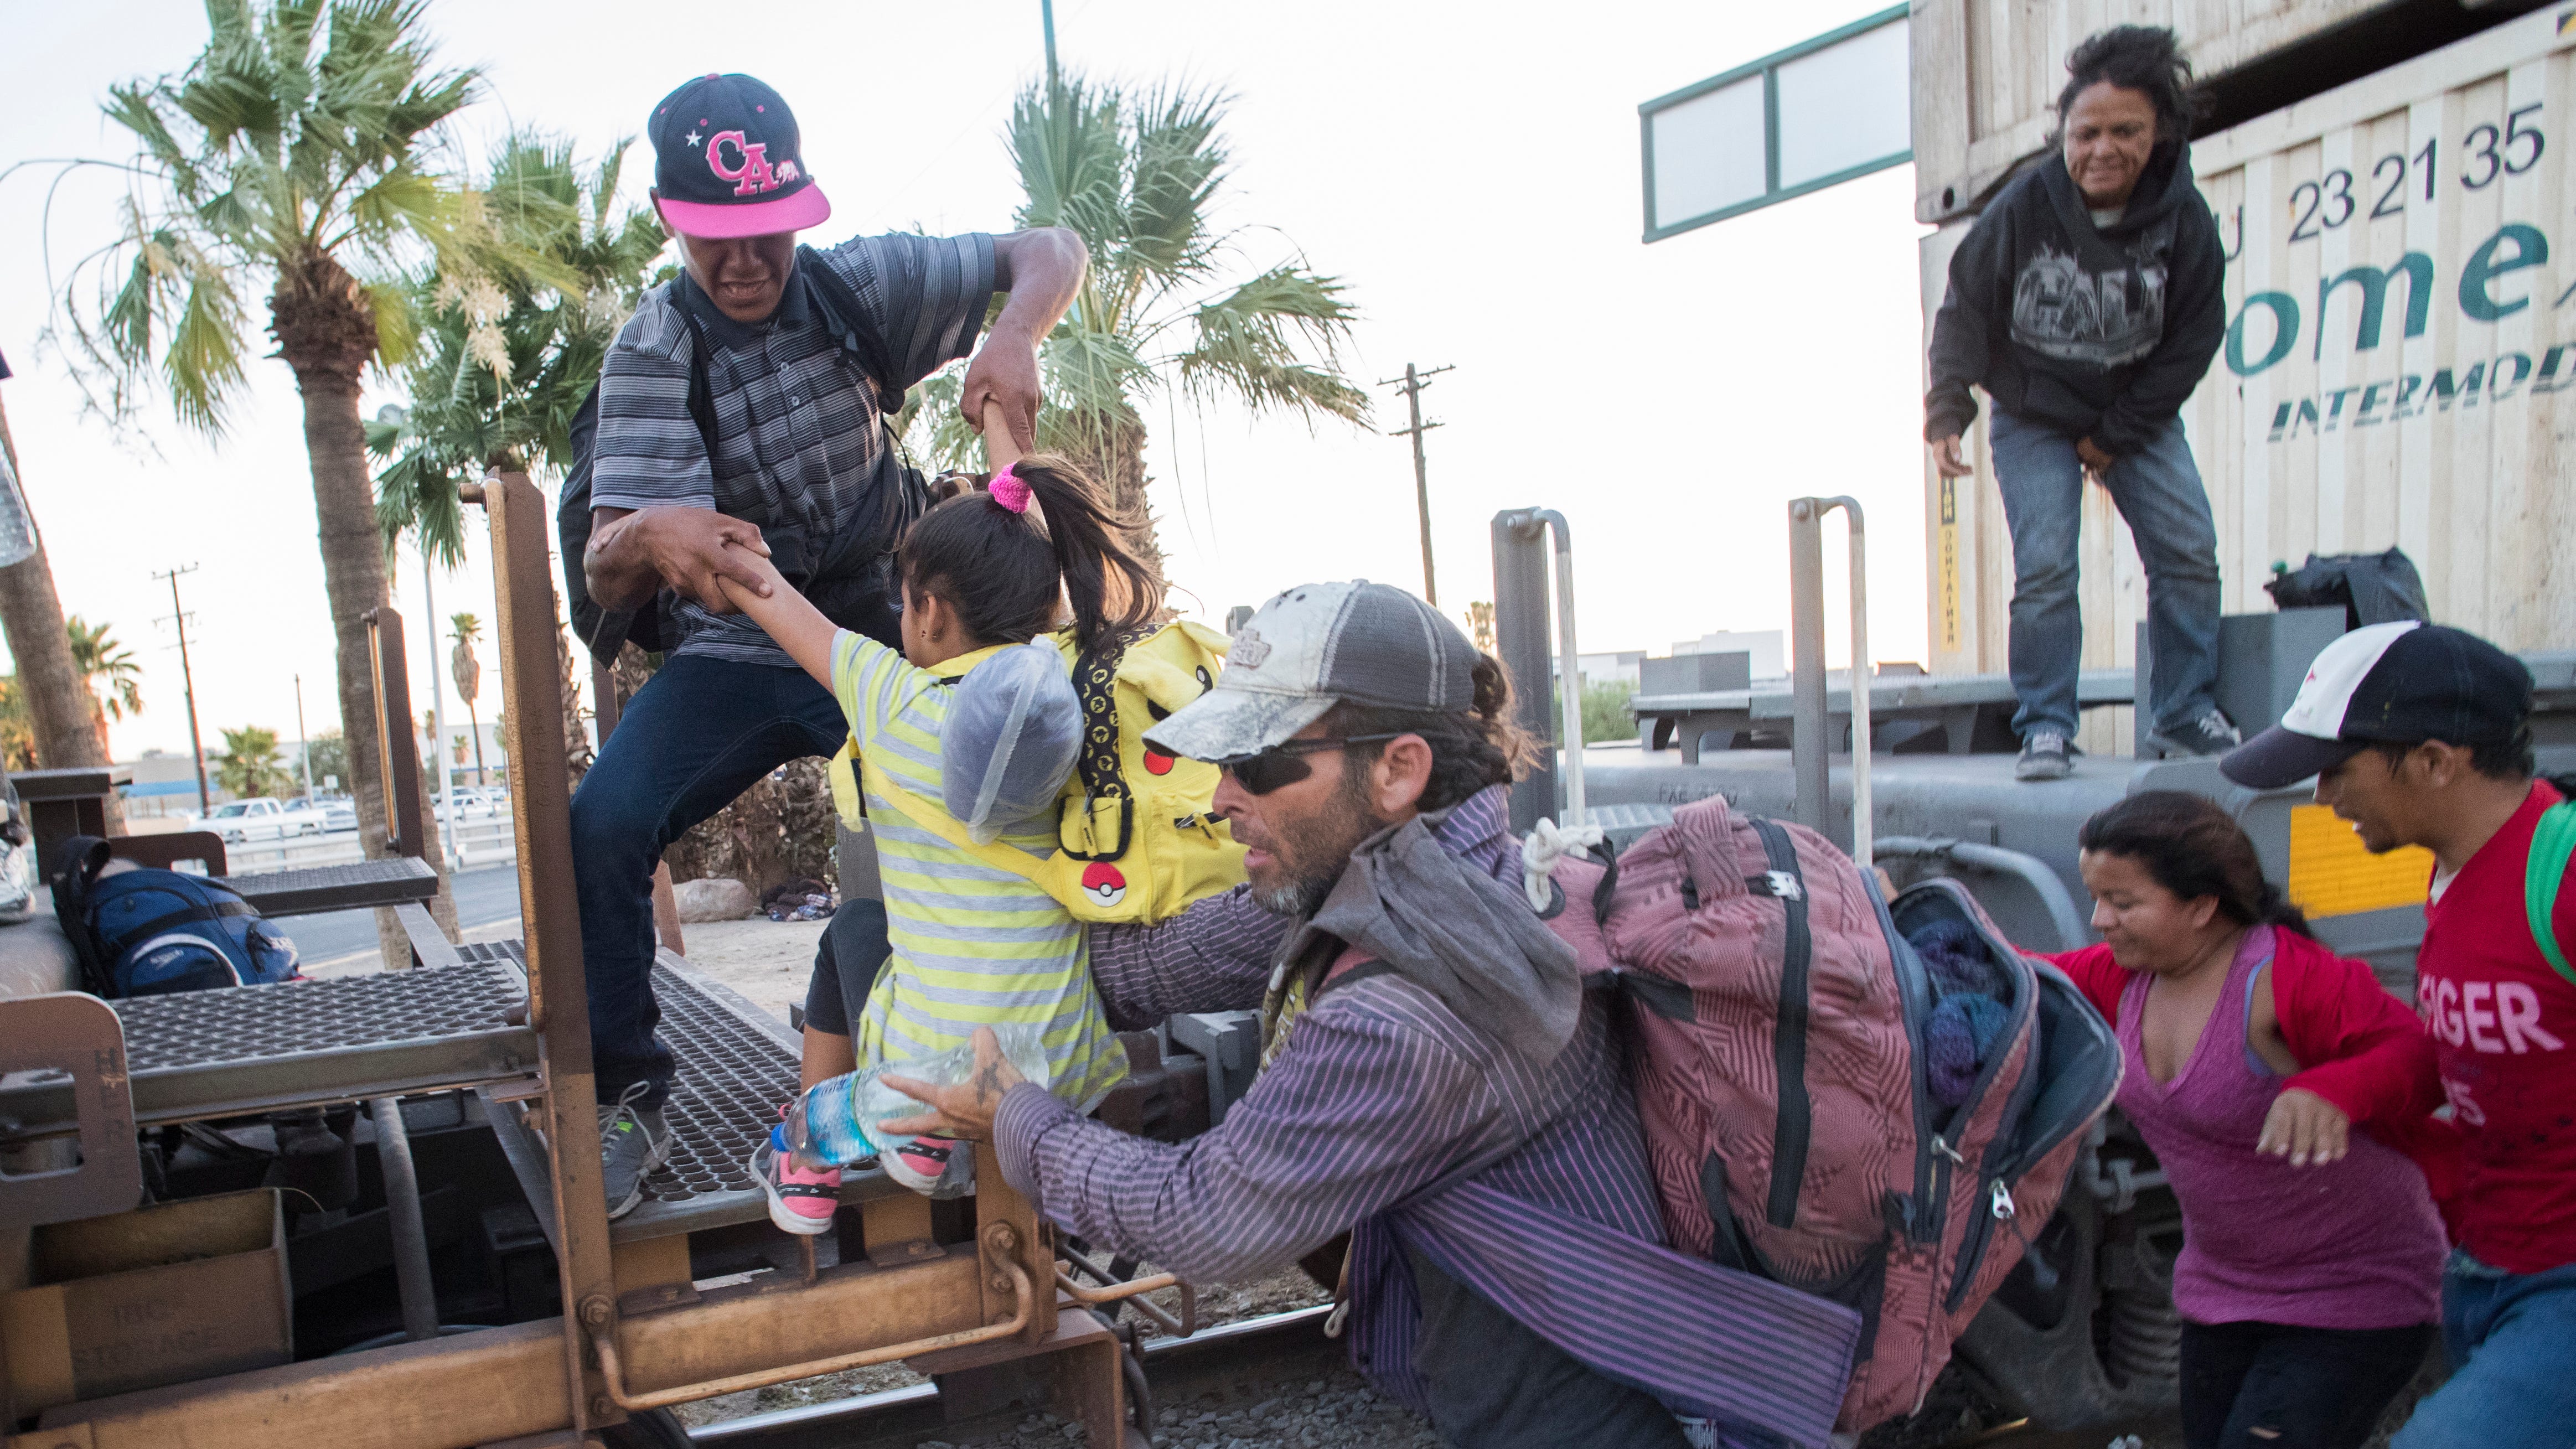 Border crisis: In Mexico, US immigration system, migrants face peril